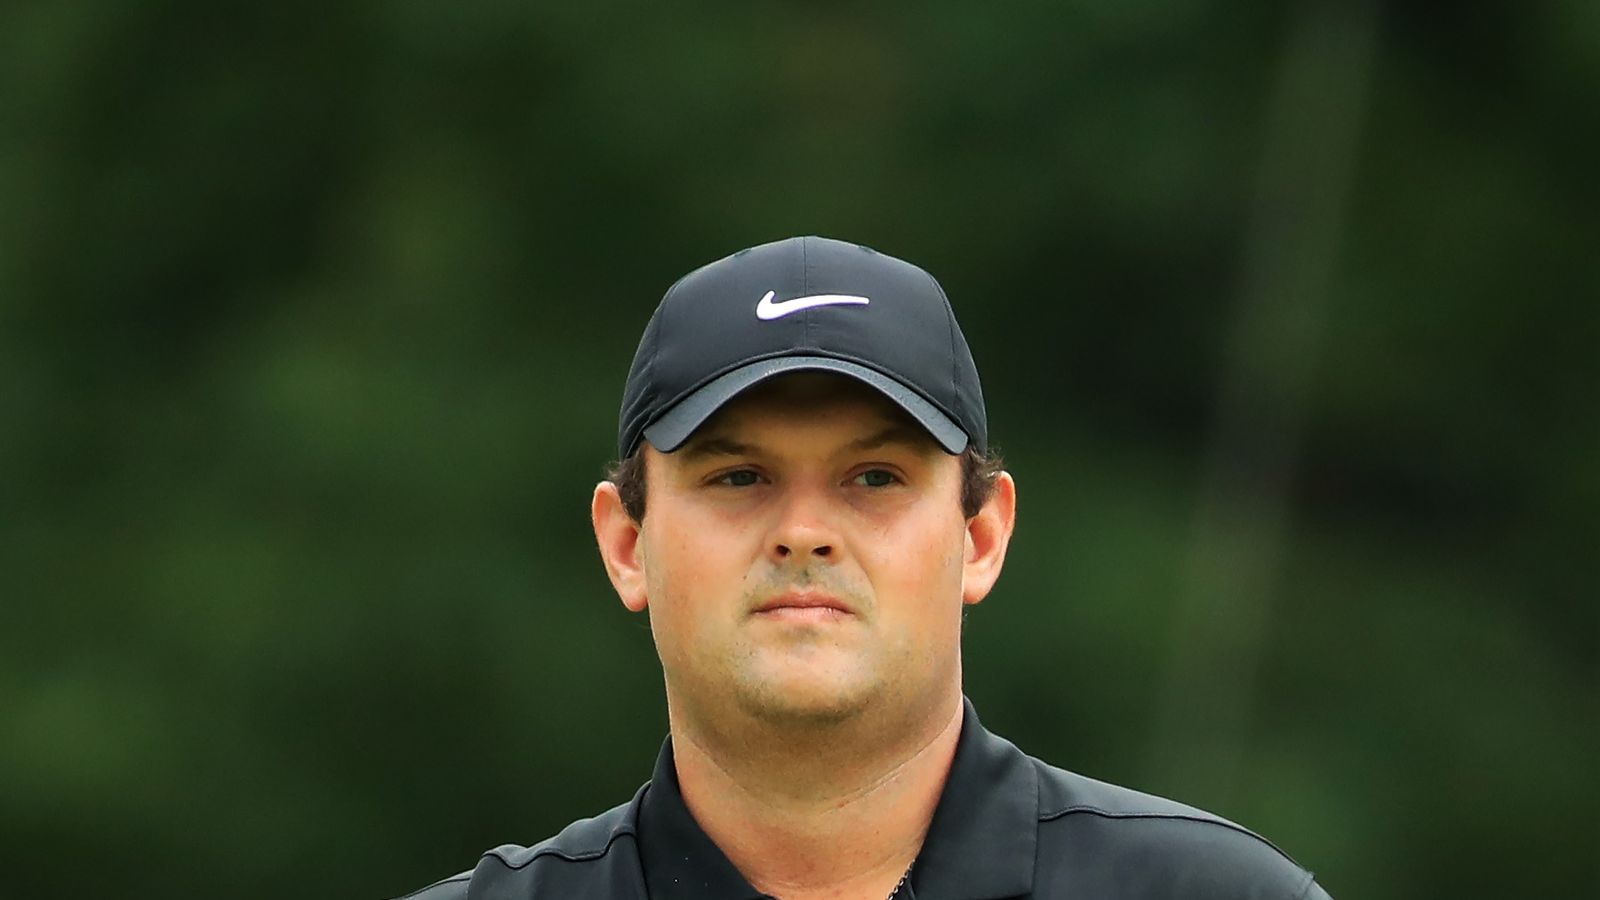 Patrick Reed not bothered by popularity, says David Livingstone | Golf ...